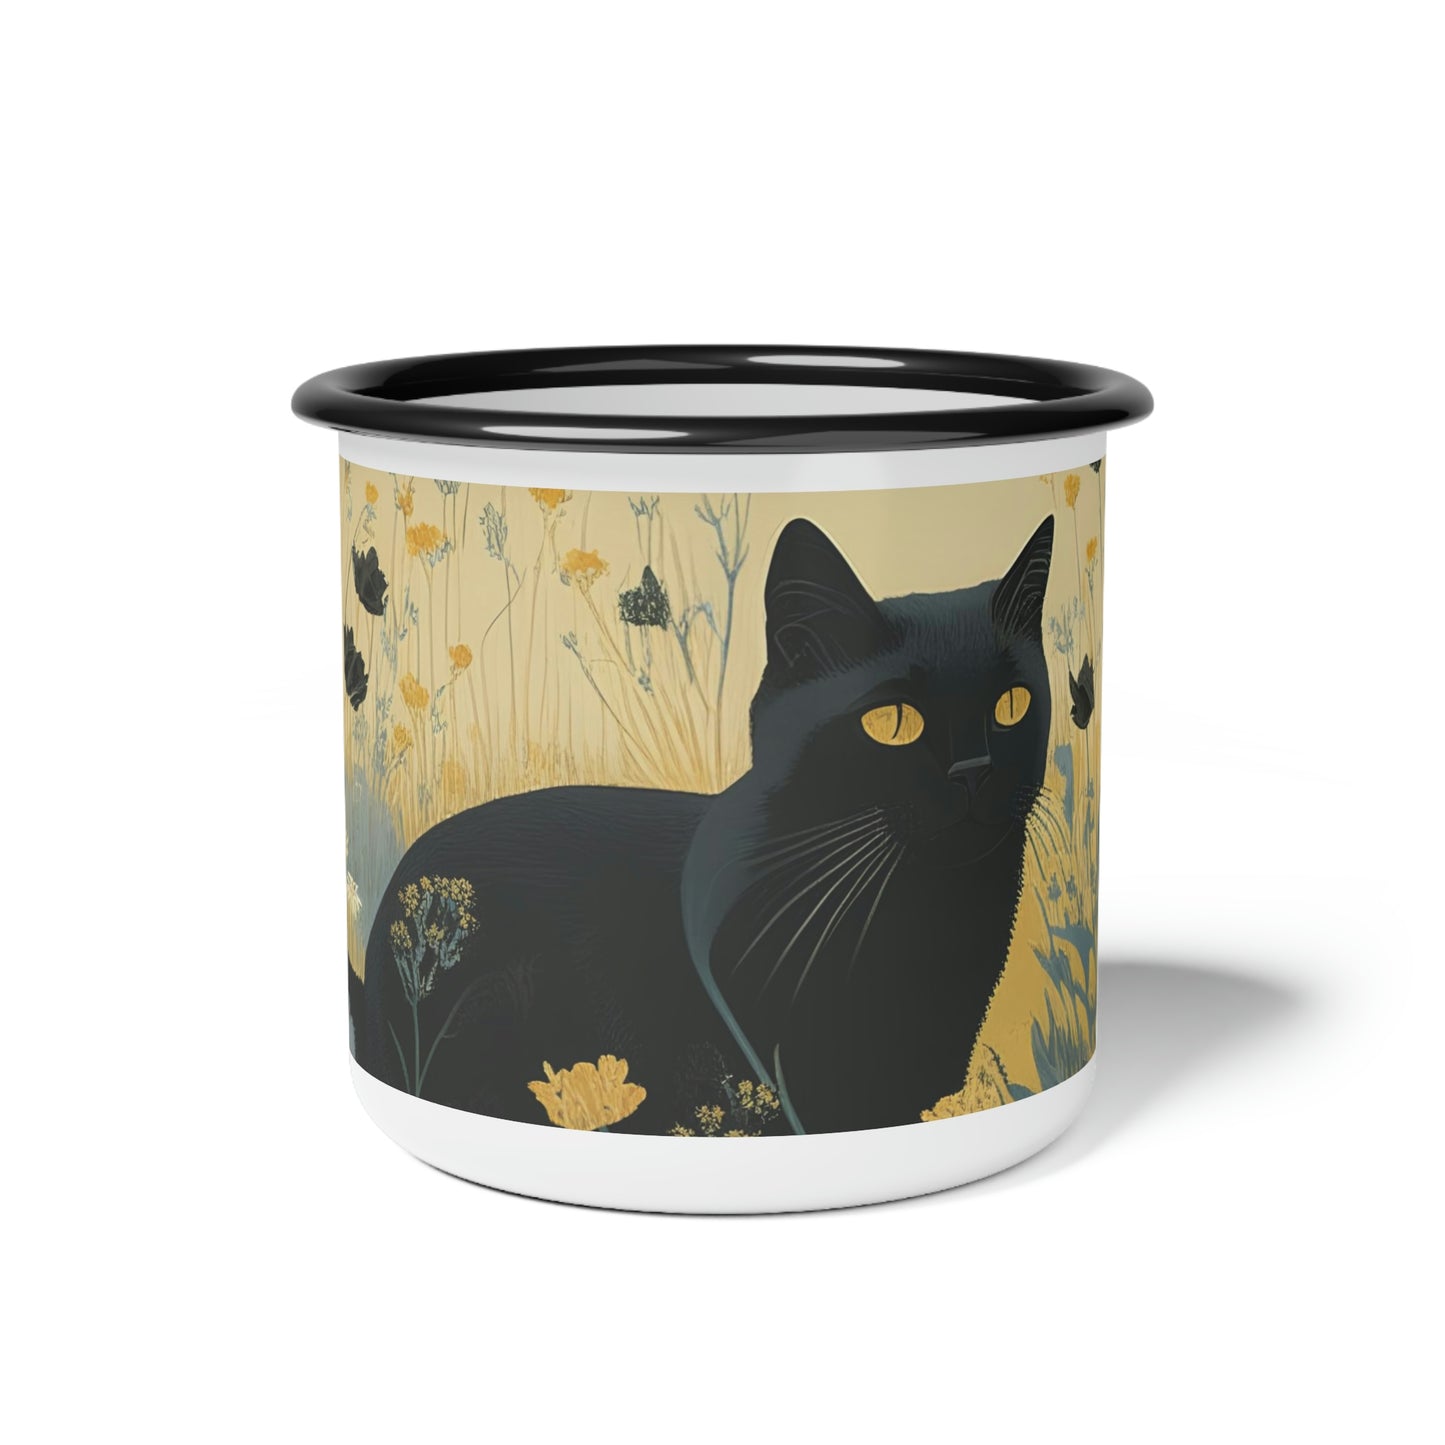 Black Cat with Black Flowers, Enamel Camping Mug for Coffee, Tea, Cocoa, or Cereal - 12oz